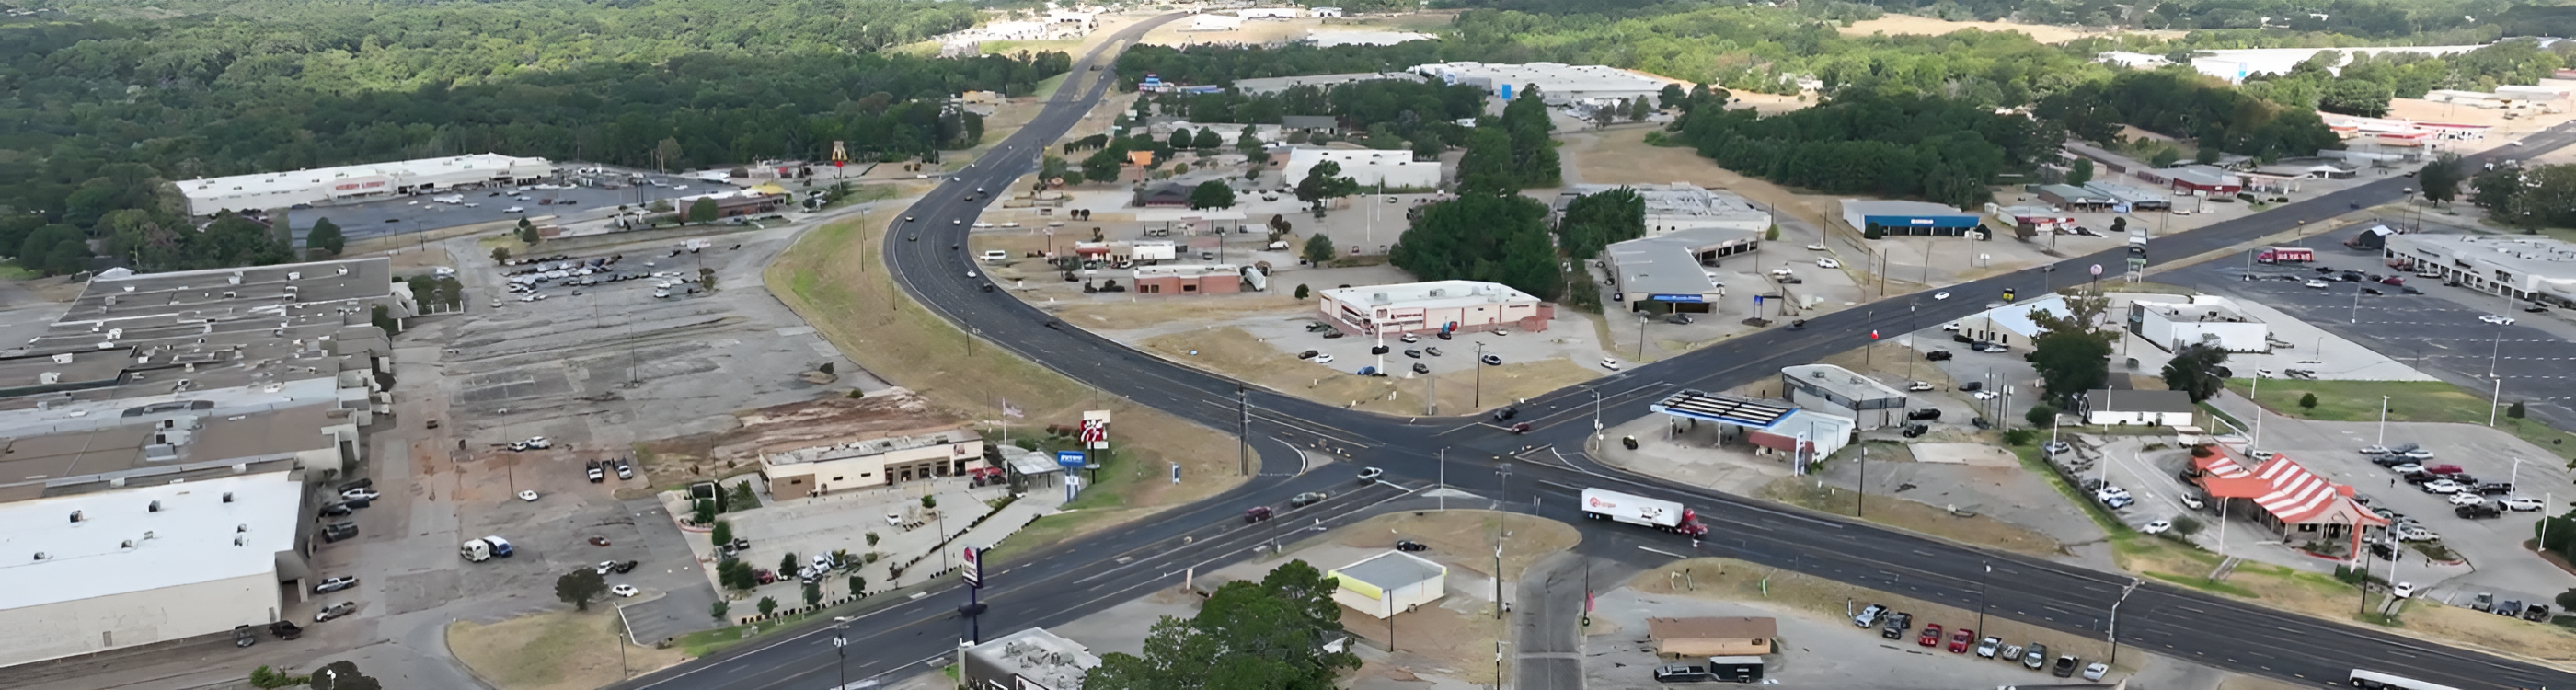 Aerial View of Crockett Road Intersection